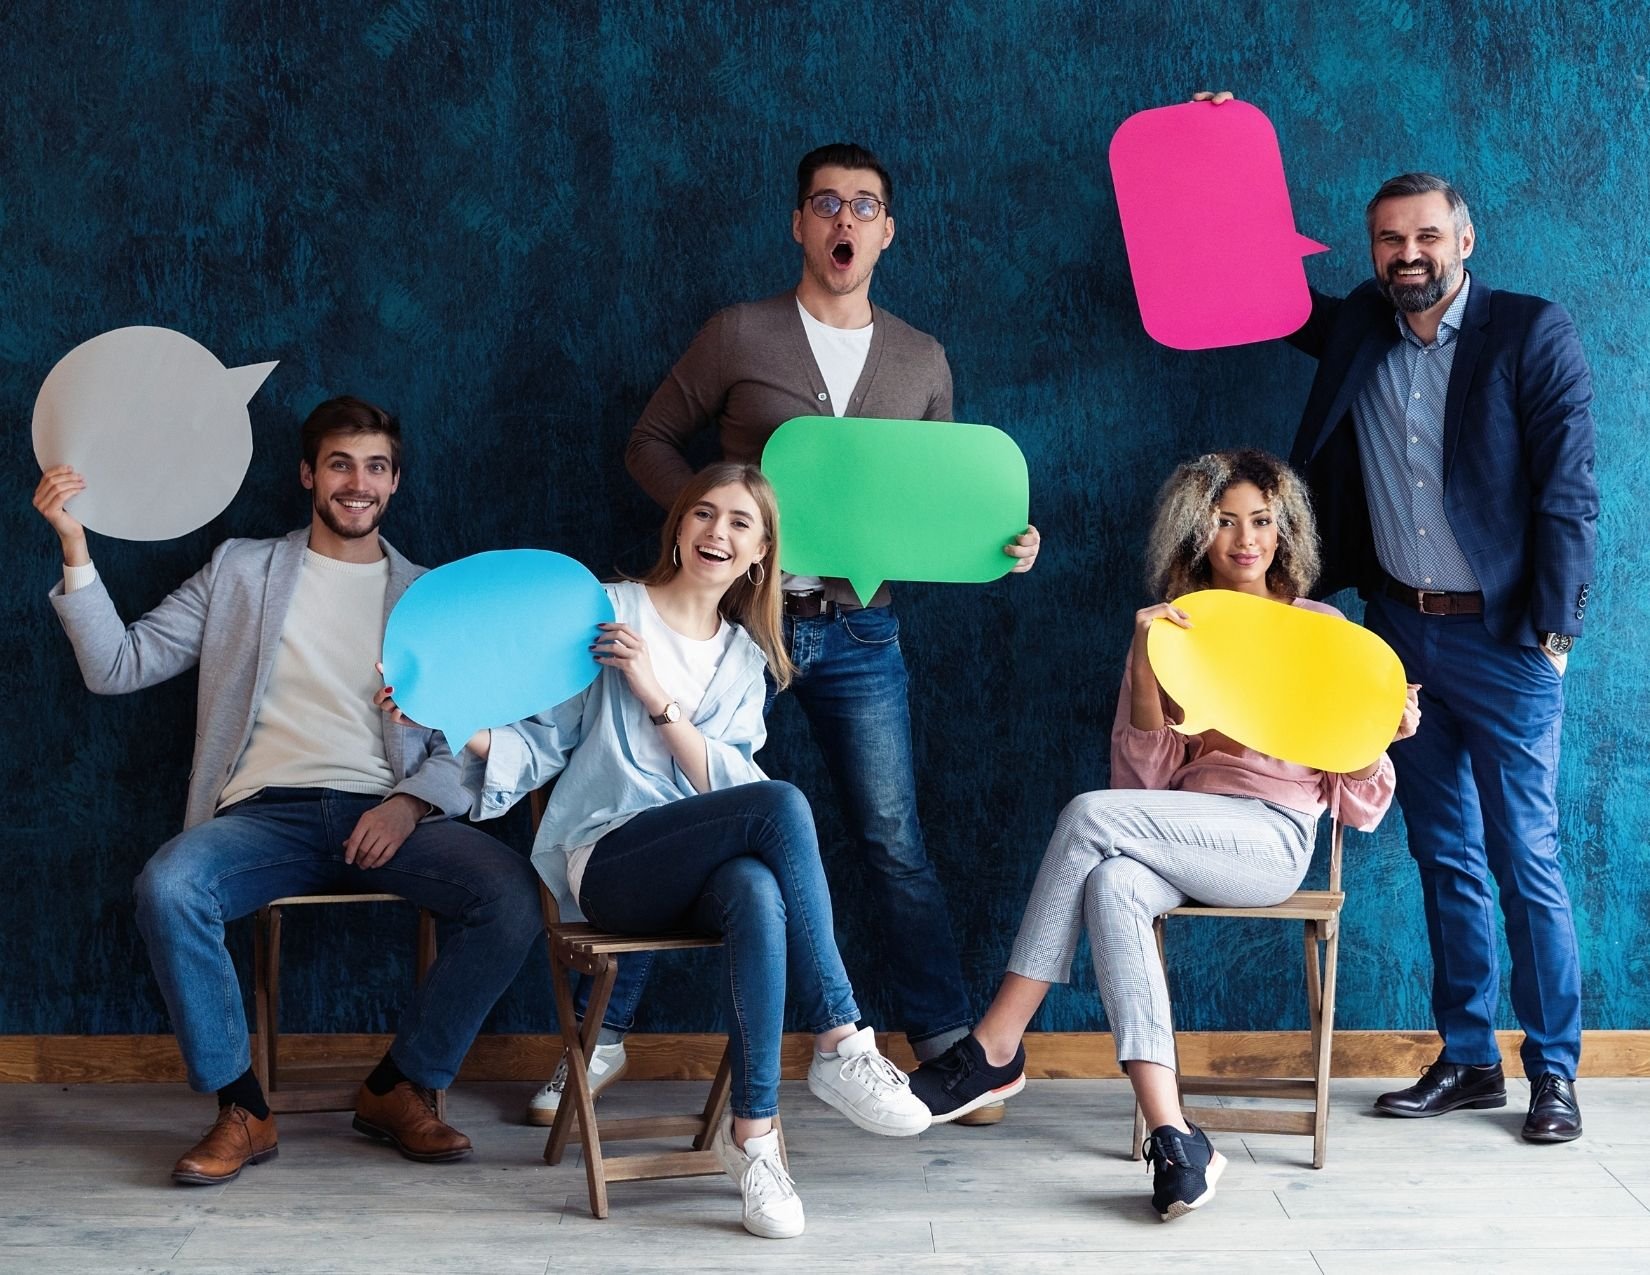 Group of people holding colored speech bubbles